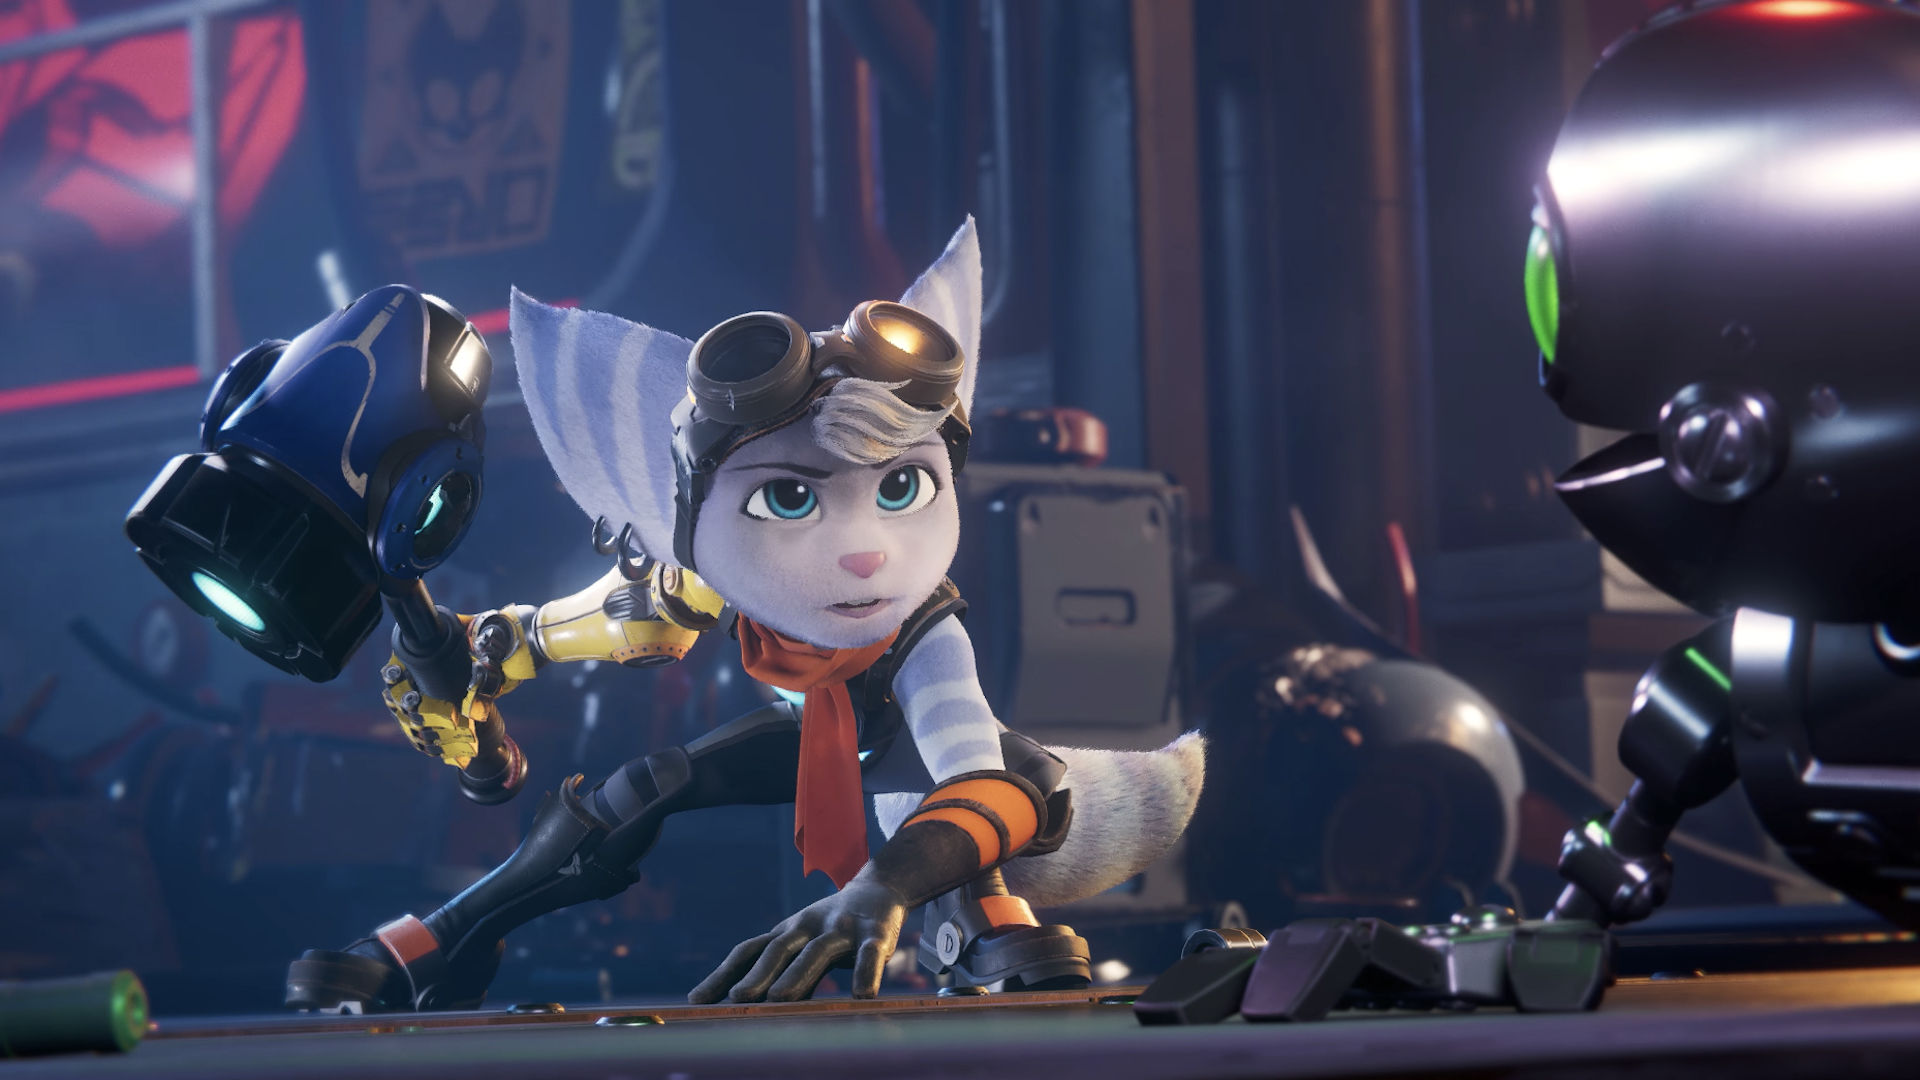 Ratchet & Clank: Rift Apart Gameplay Trailer Released